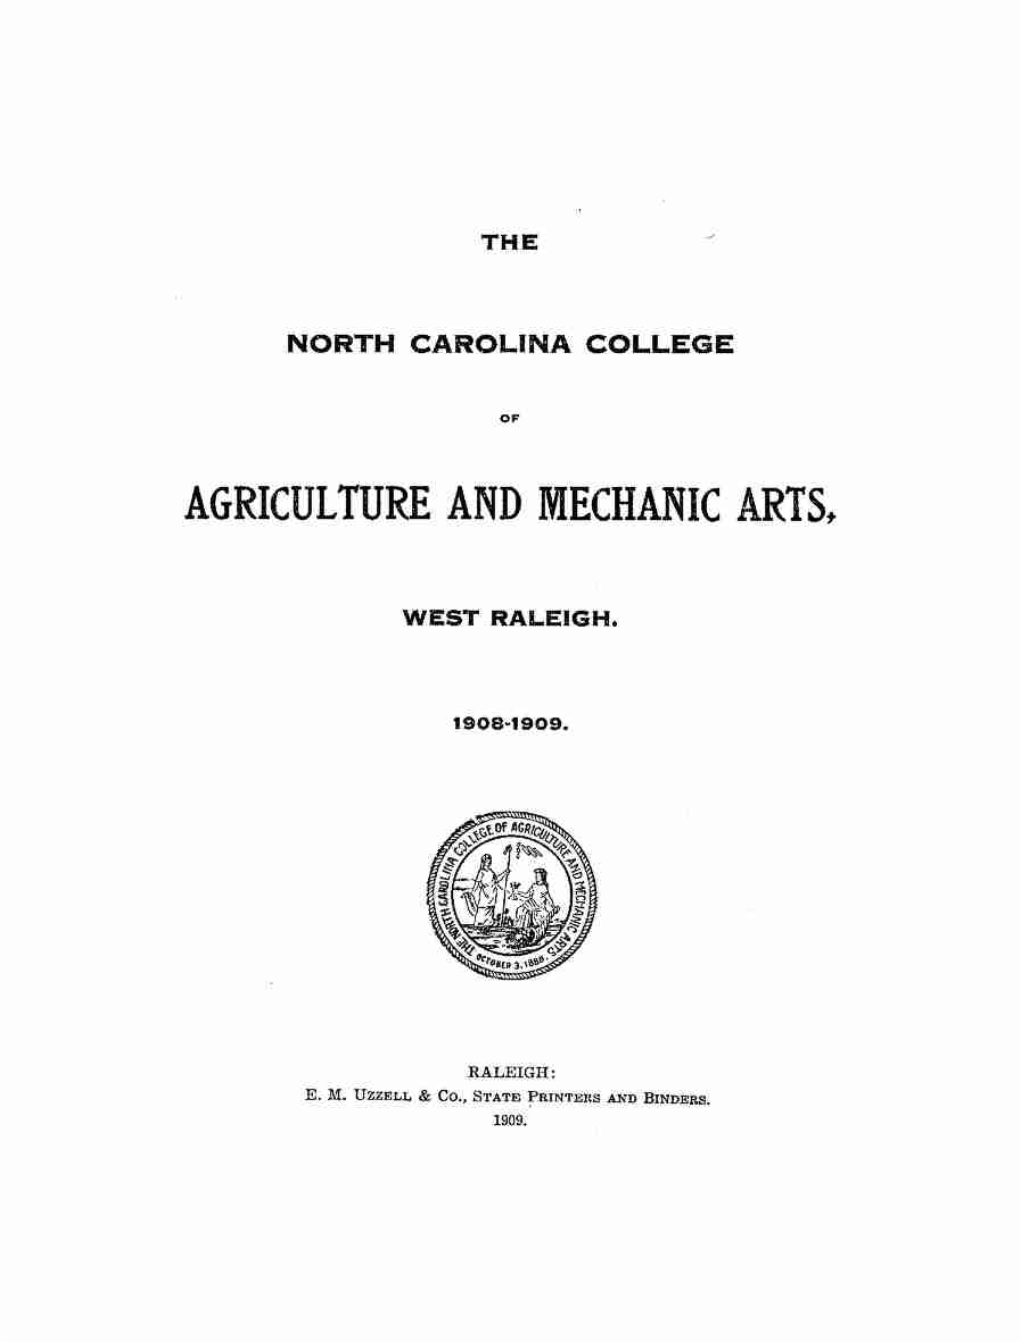 The North Carolina College Agriculture and Mechanic